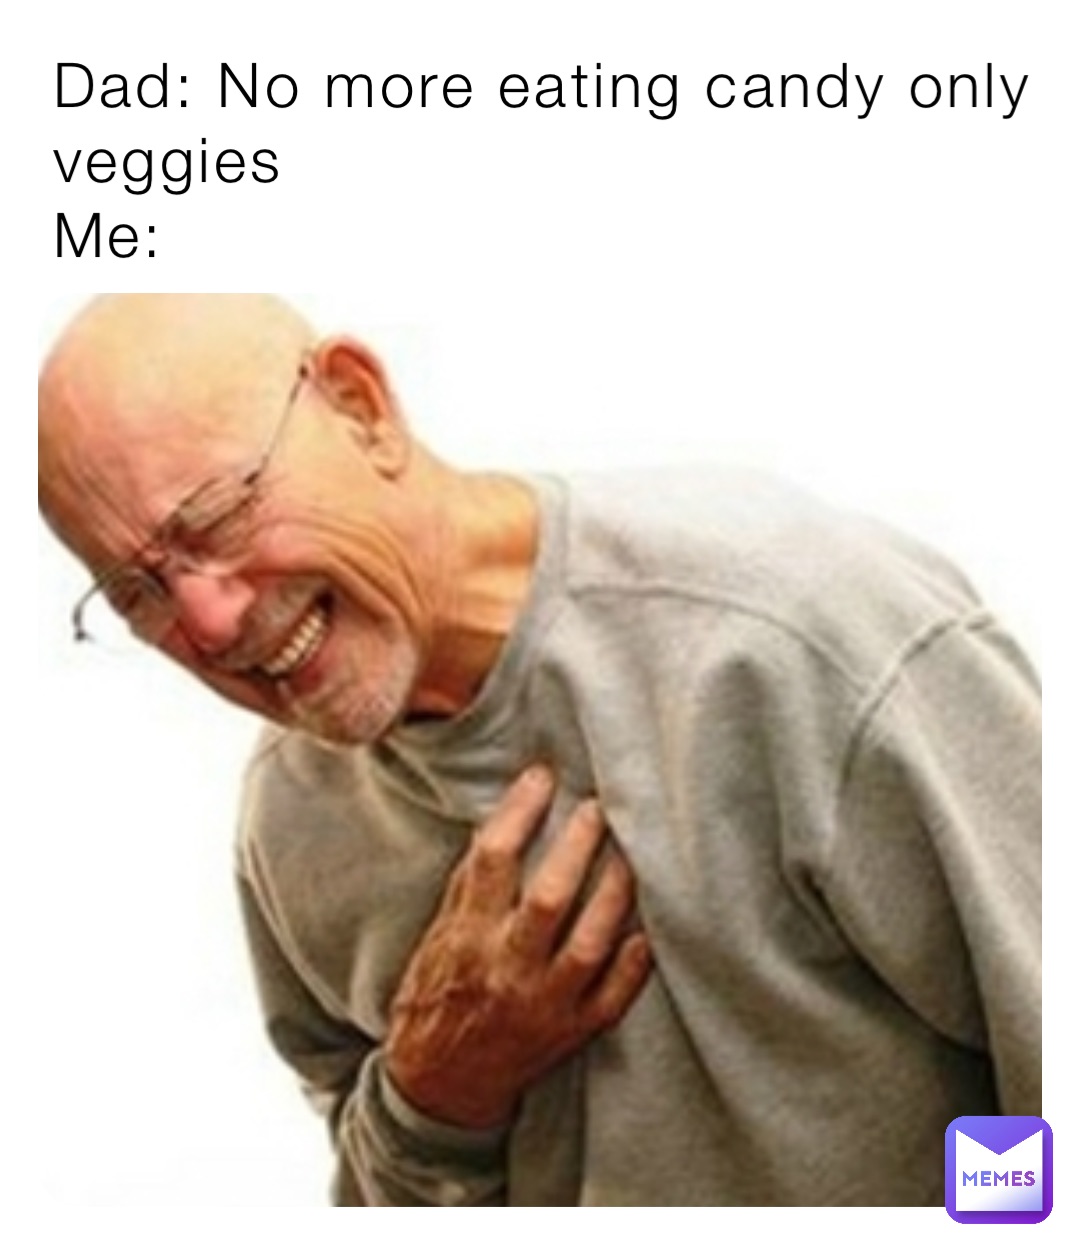 Dad: No more eating candy only veggies
Me: